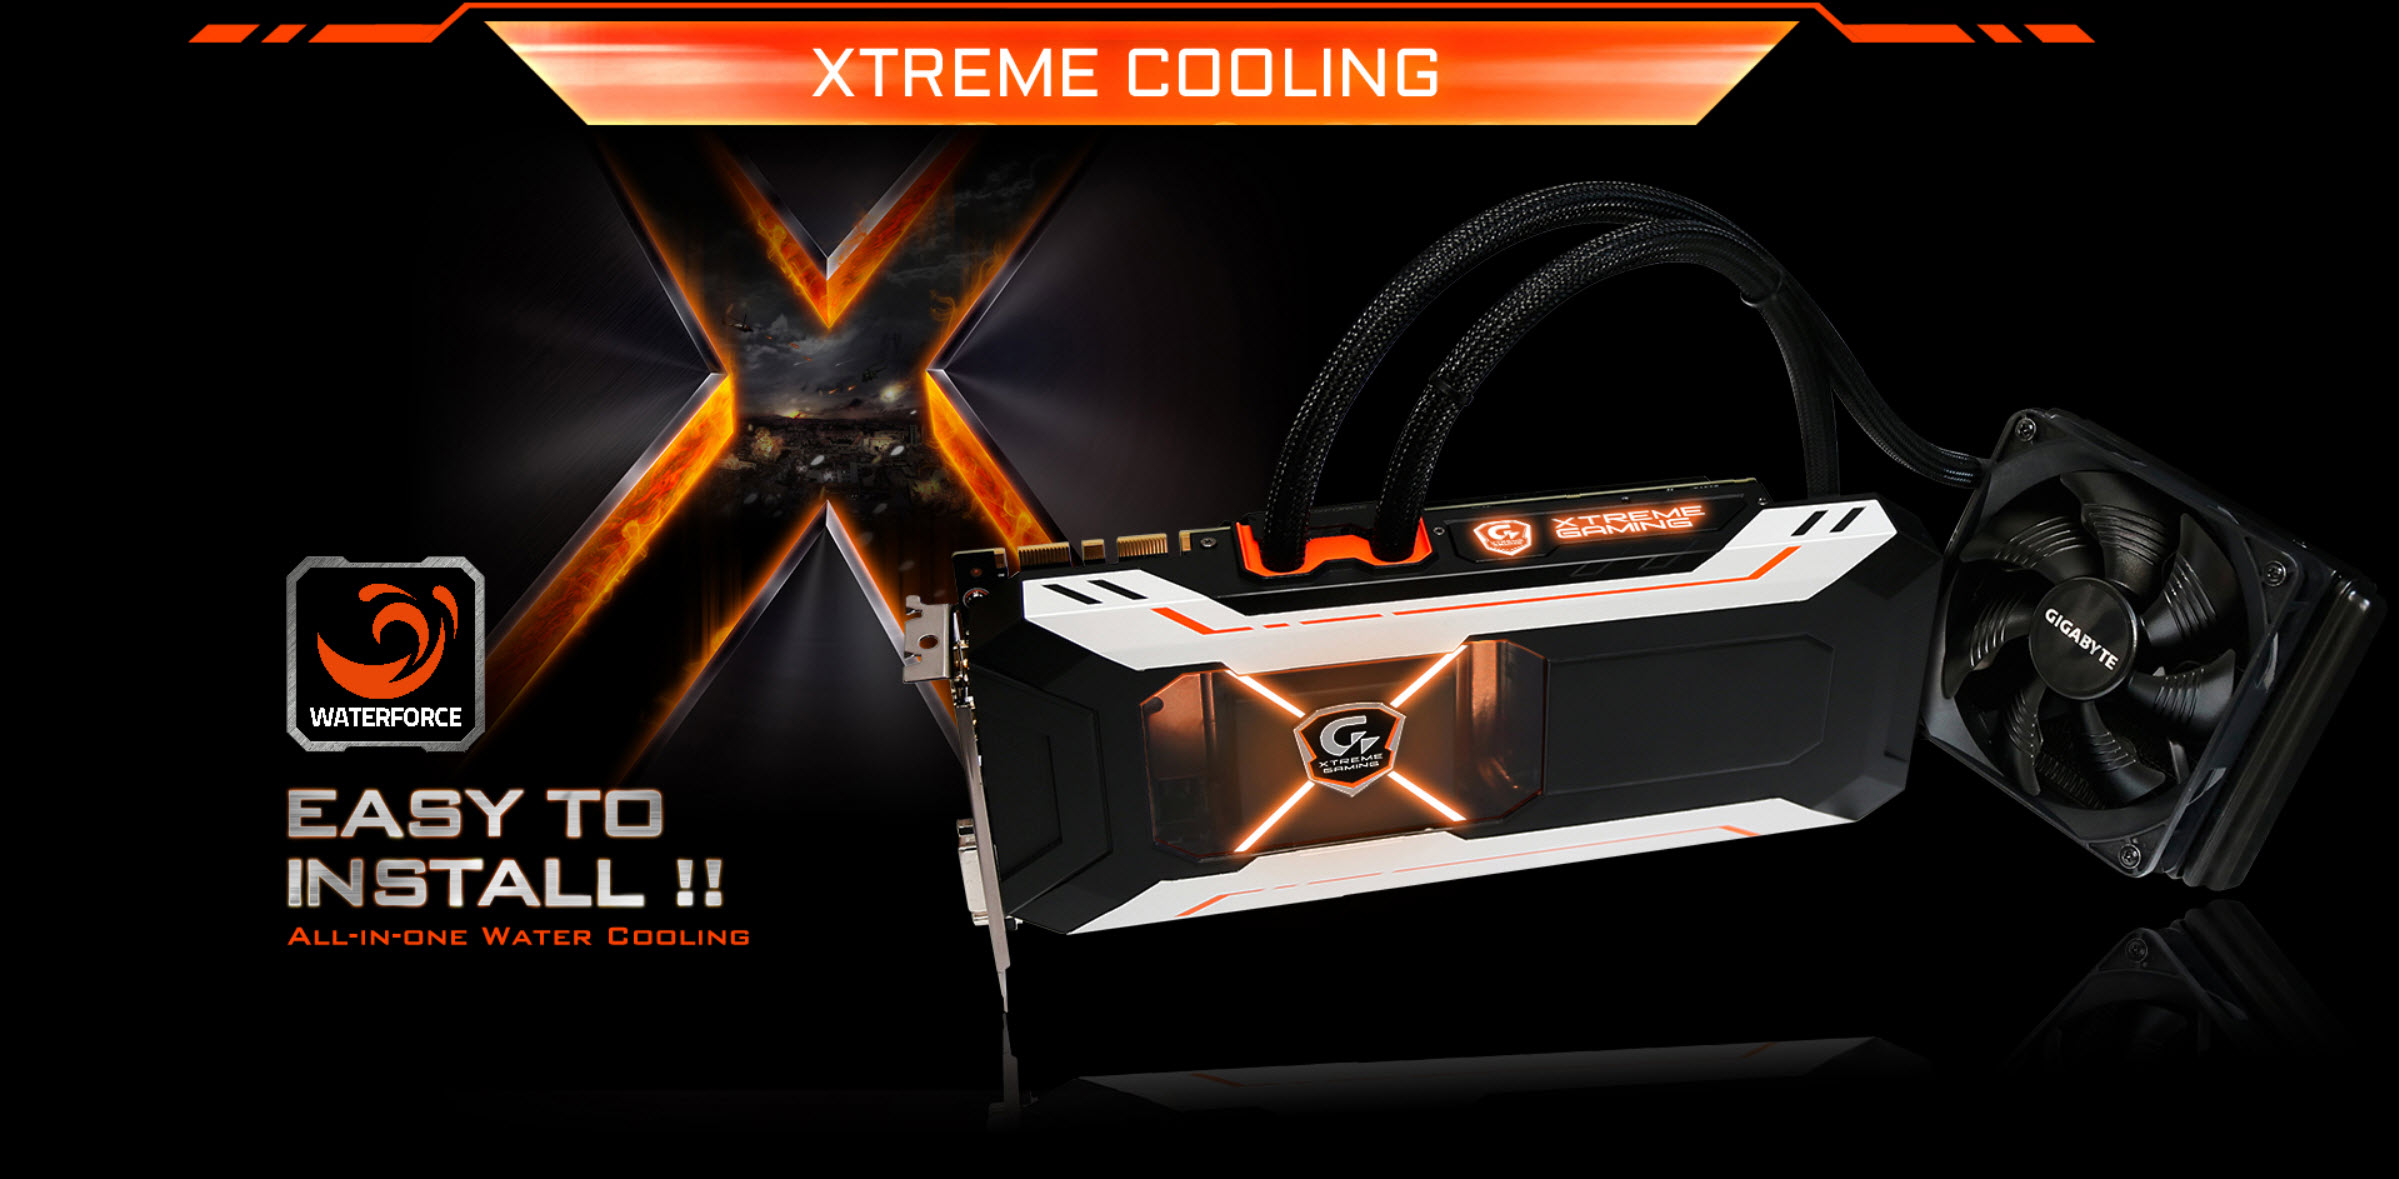 Gigabyte-GeForce-GTX-1080-Xtreme-Gaming-Water-Cooling-Graphics-Card_1